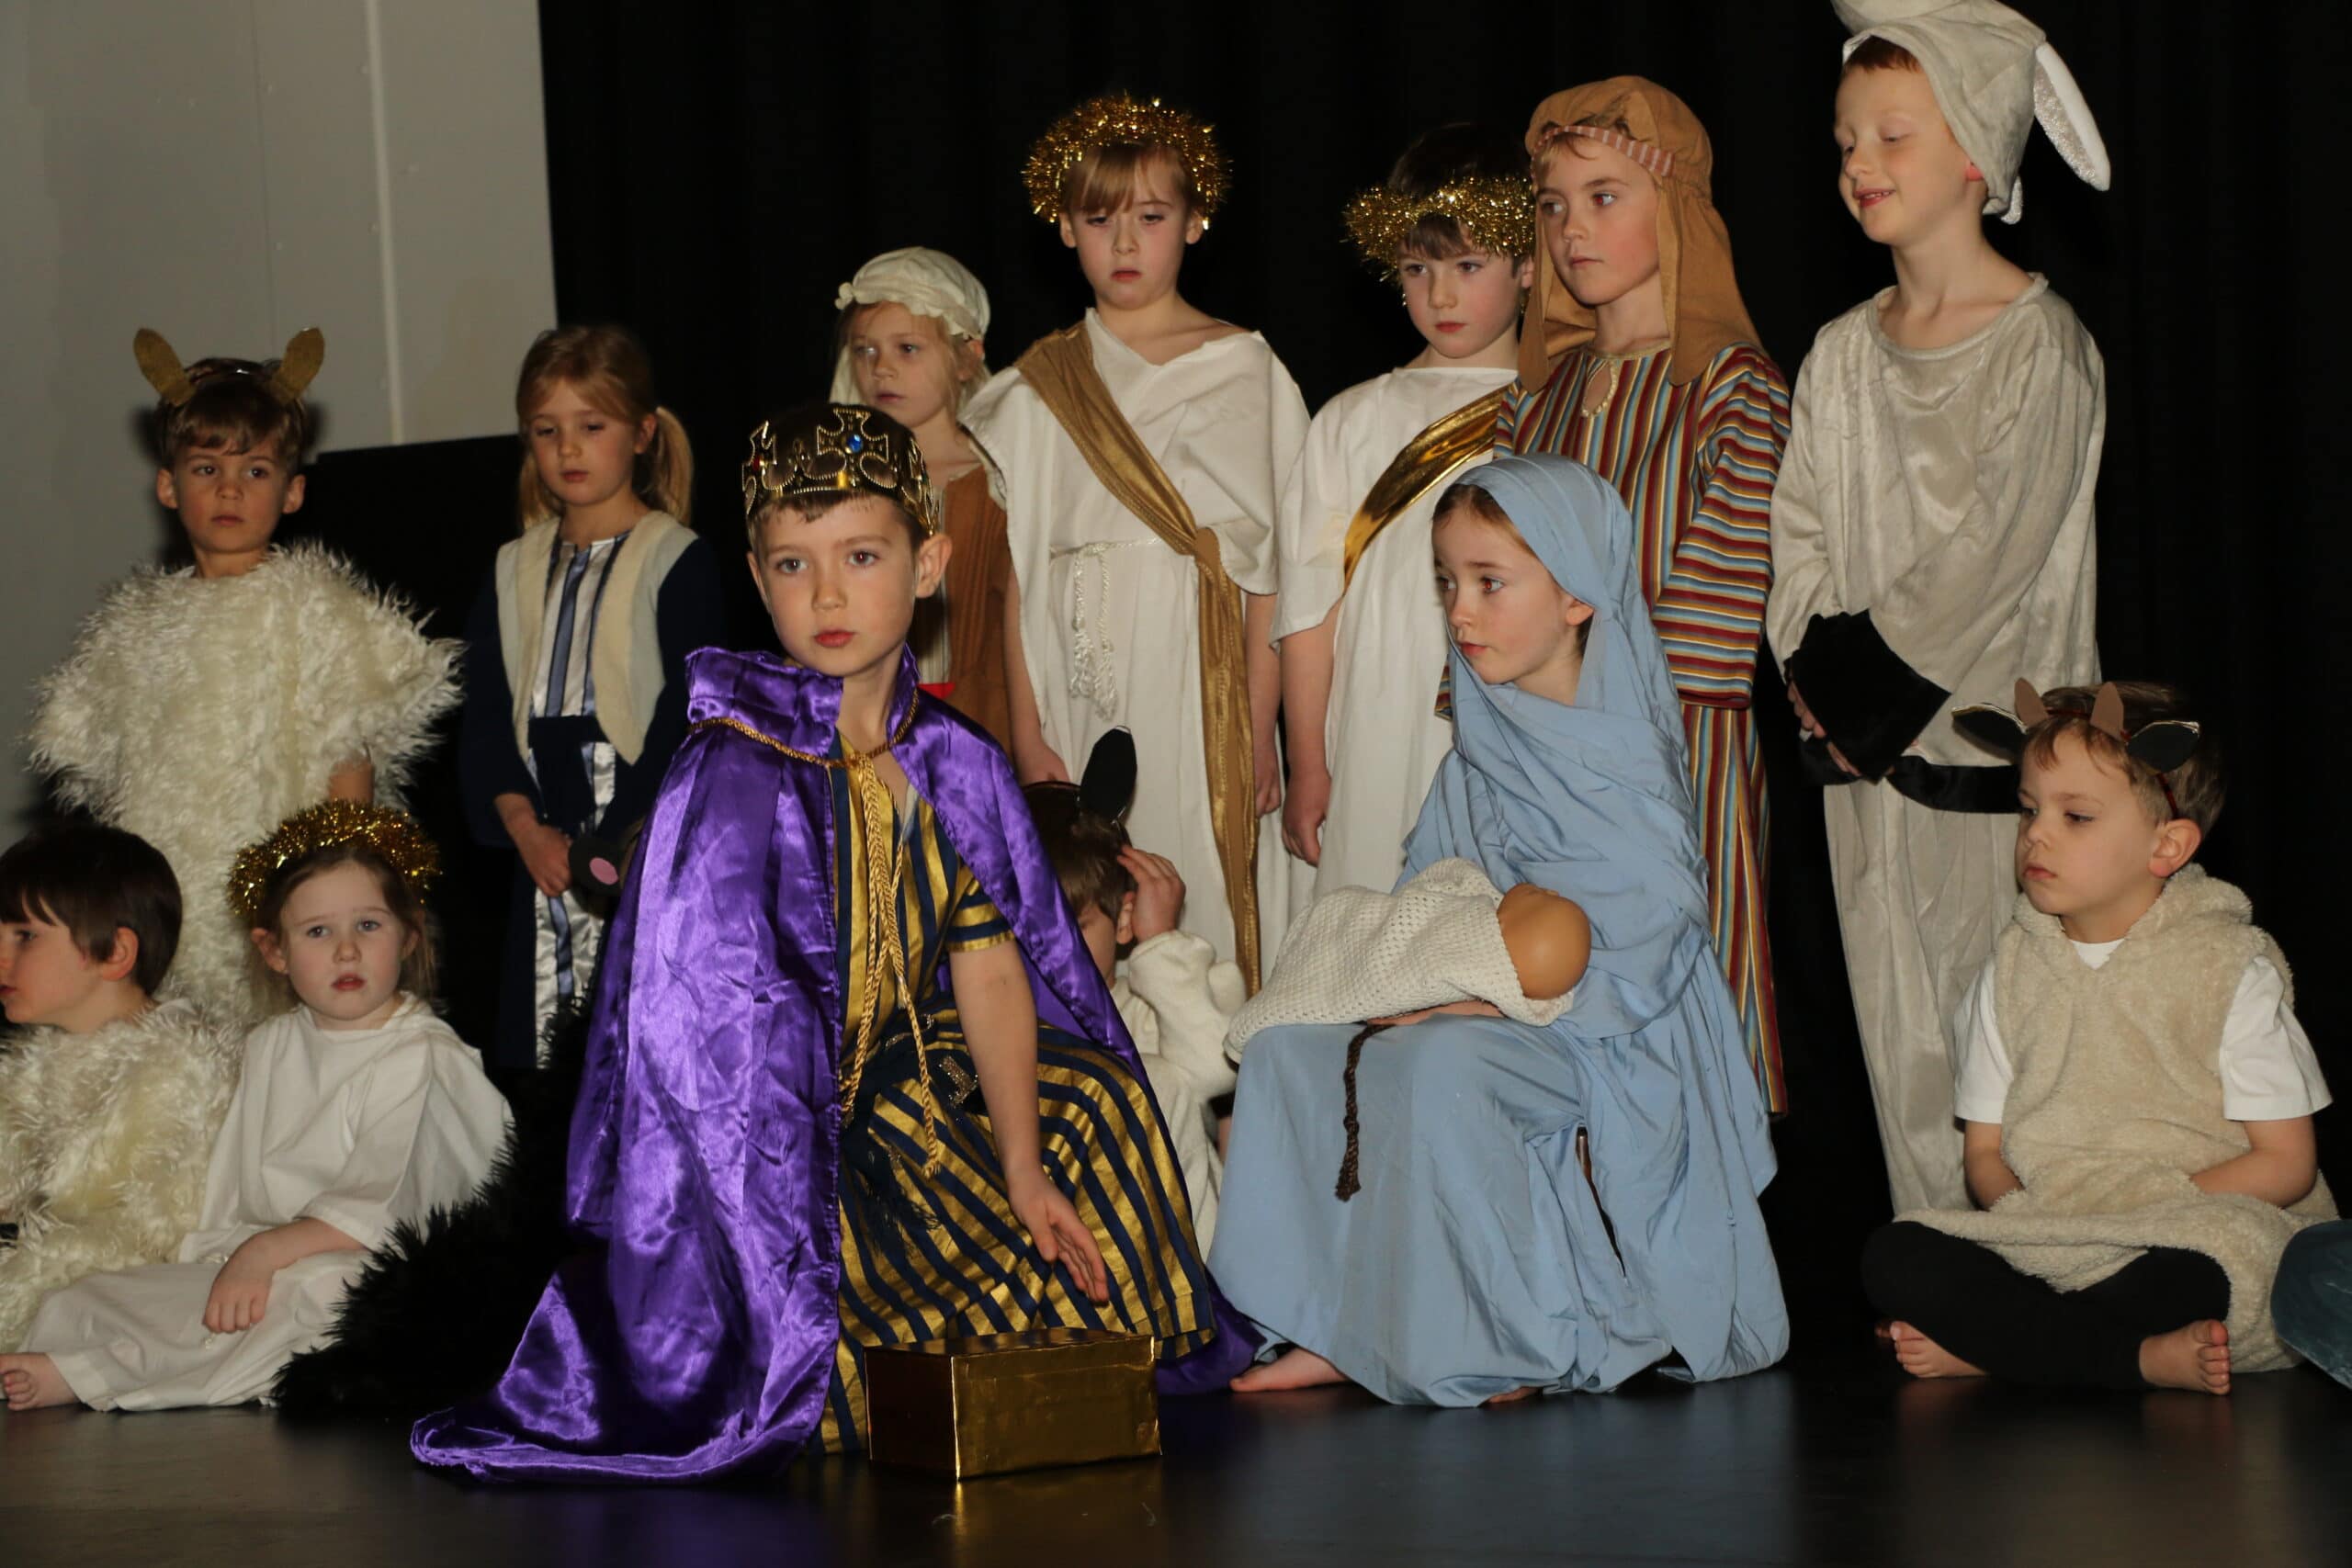 Group of school children performing nativity play